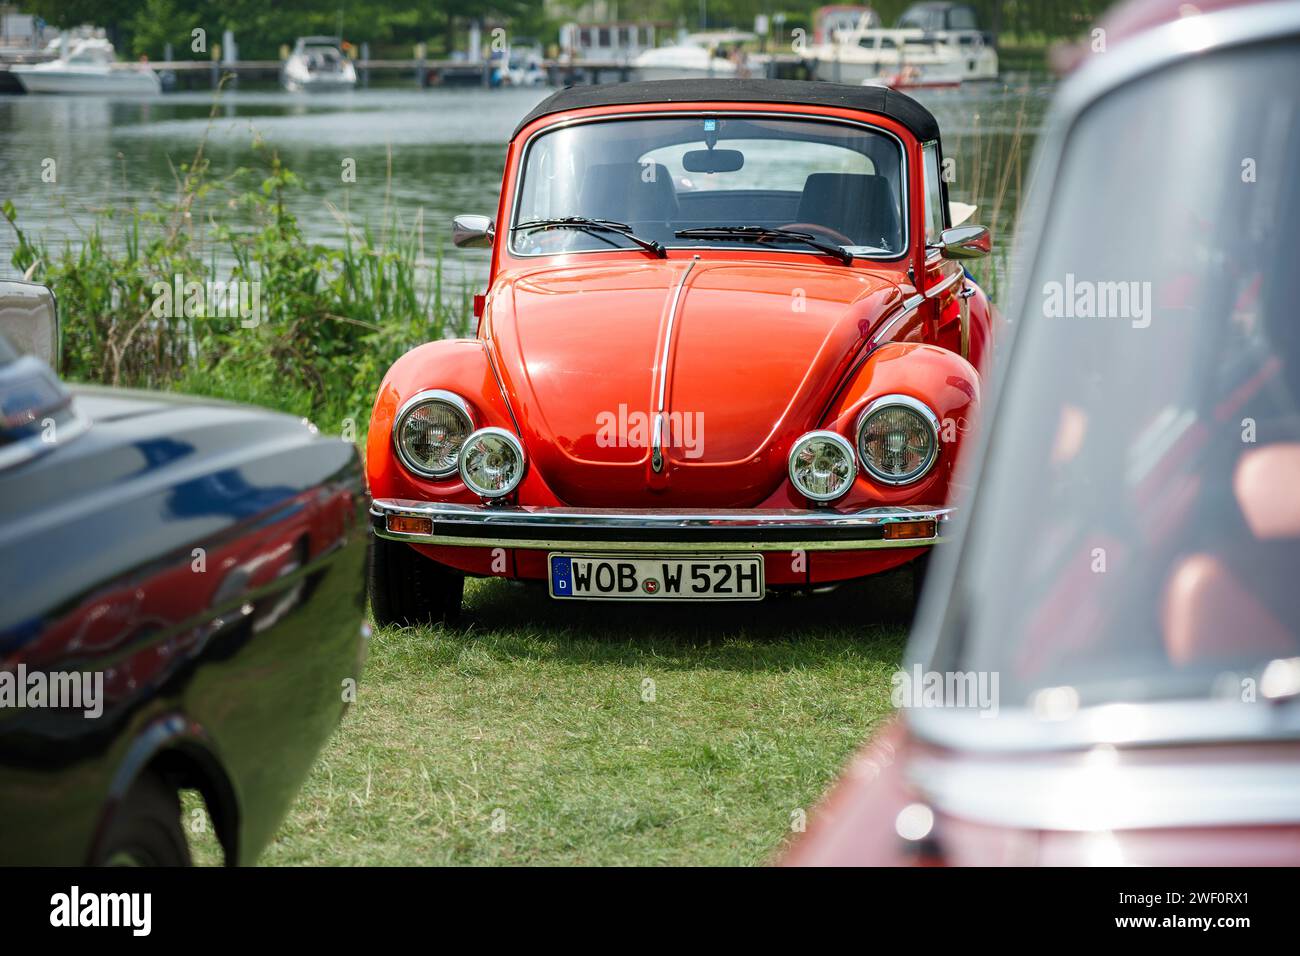 WERDER (HAVEL), GERMANY - MAY 20, 2023: The subcompact, economy car Volkswagen Beetle, 1952. Oldtimer - Festival Werder Classics 2023 Stock Photo